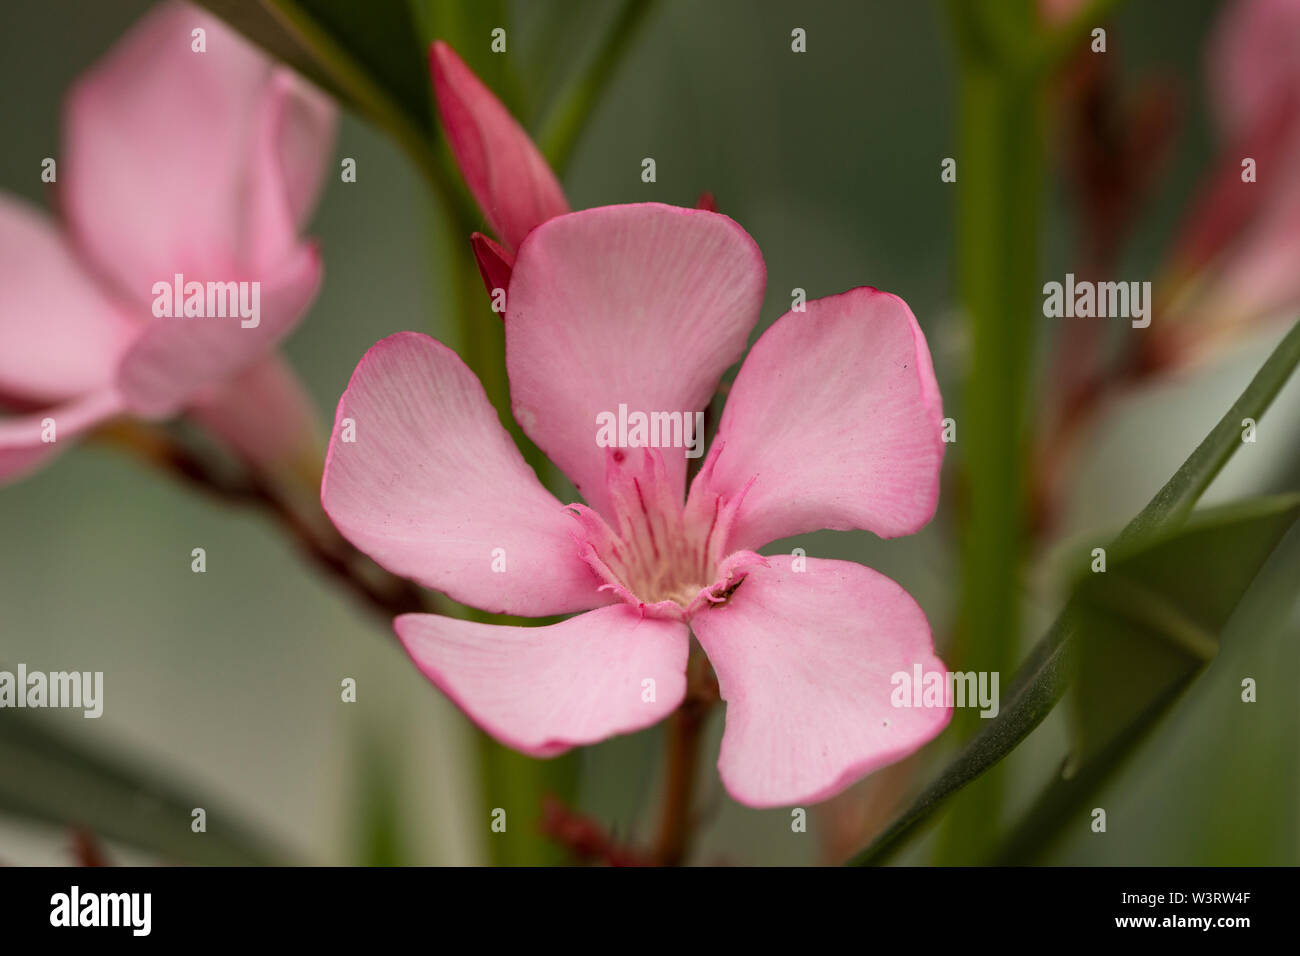 Nerium oleander, a shrub or small tree in the dogbane family Apocynaceae, native to tropical areas, especially the Mediterranean basin. Stock Photo